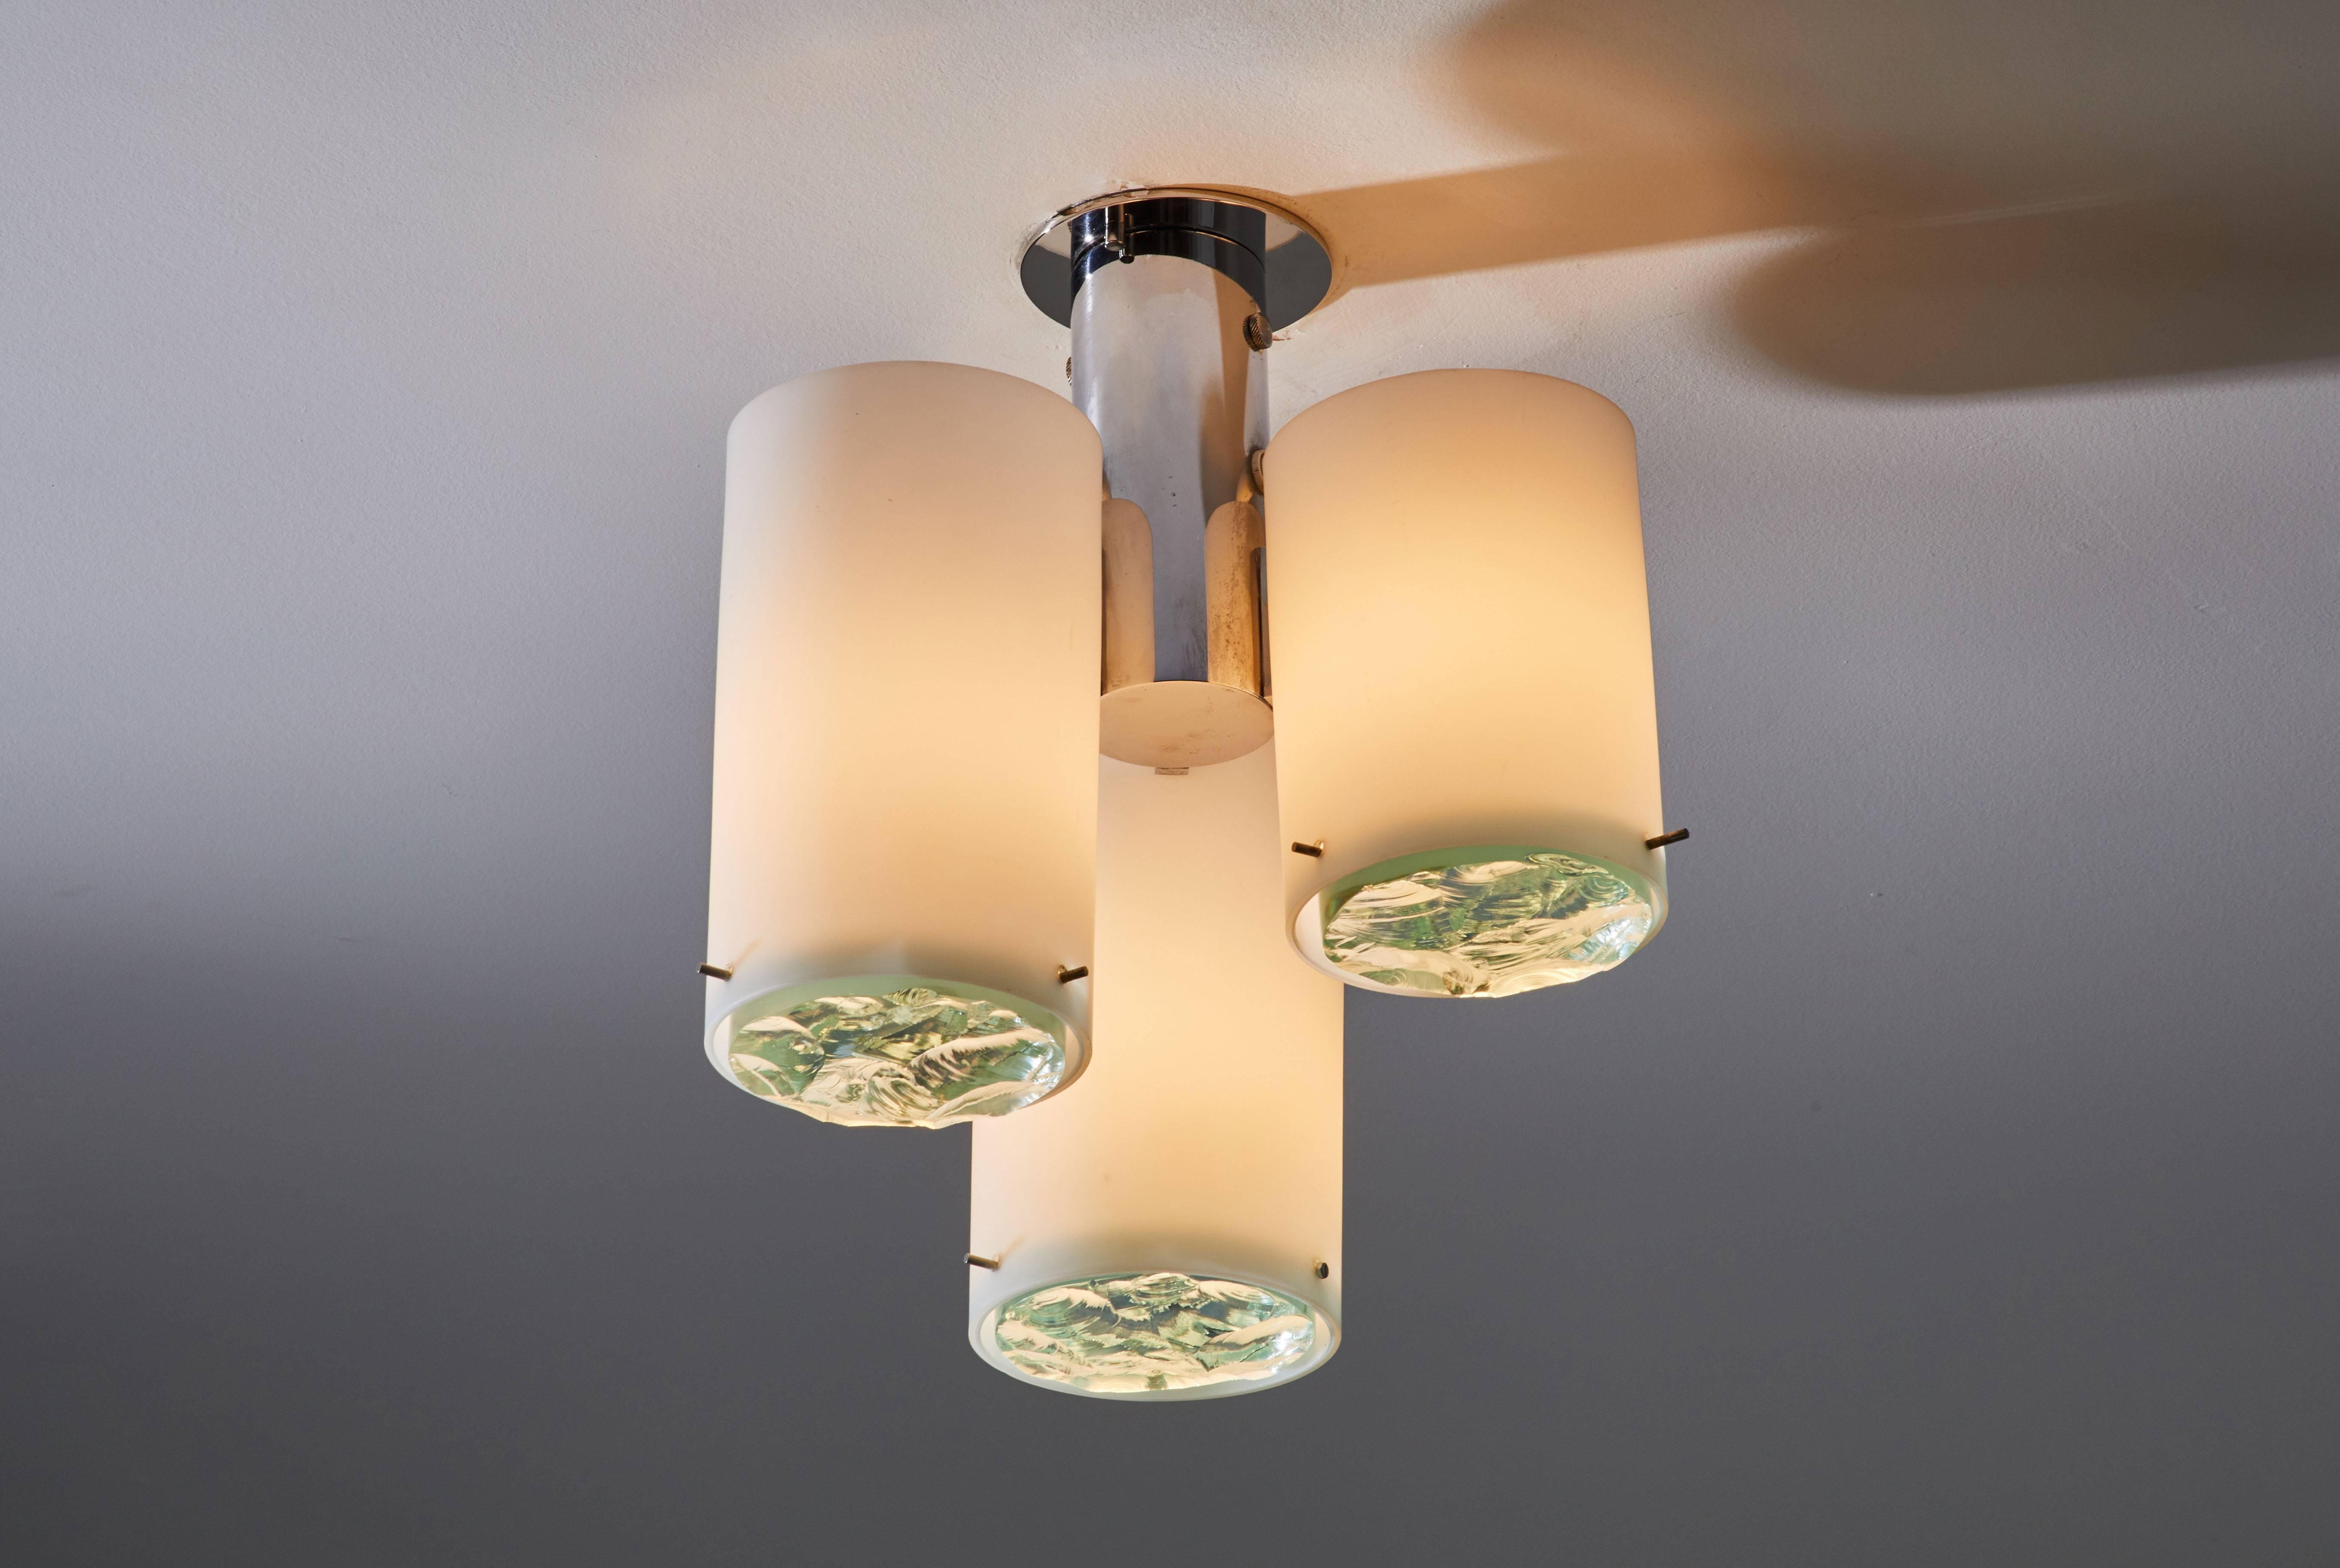 Flush mount ceiling light attributed to Max Ingrand for Fontana Arte. Designed and manufactured in Italy, circa 1960s. Three shades, chrome, brushed satin glass, and faceted crystal diffusers. Wired for US junction boxes. Each light takes one E14